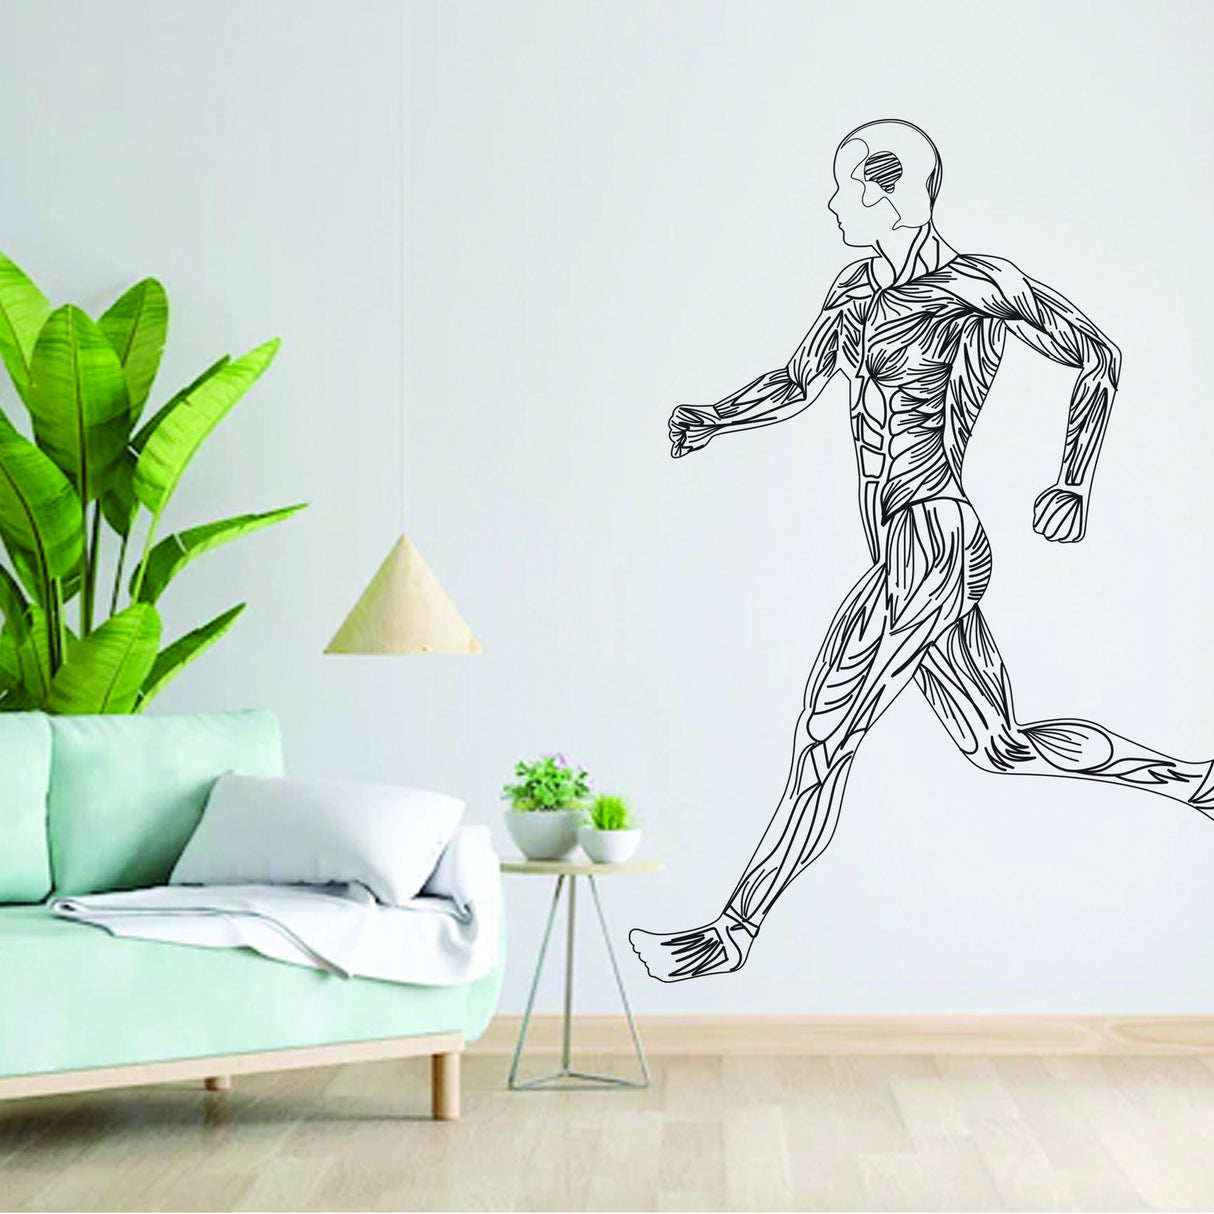 Fitness Wall Sticker, Sleek Silhouette Gym Exercise Decal, Home Workout Decoration